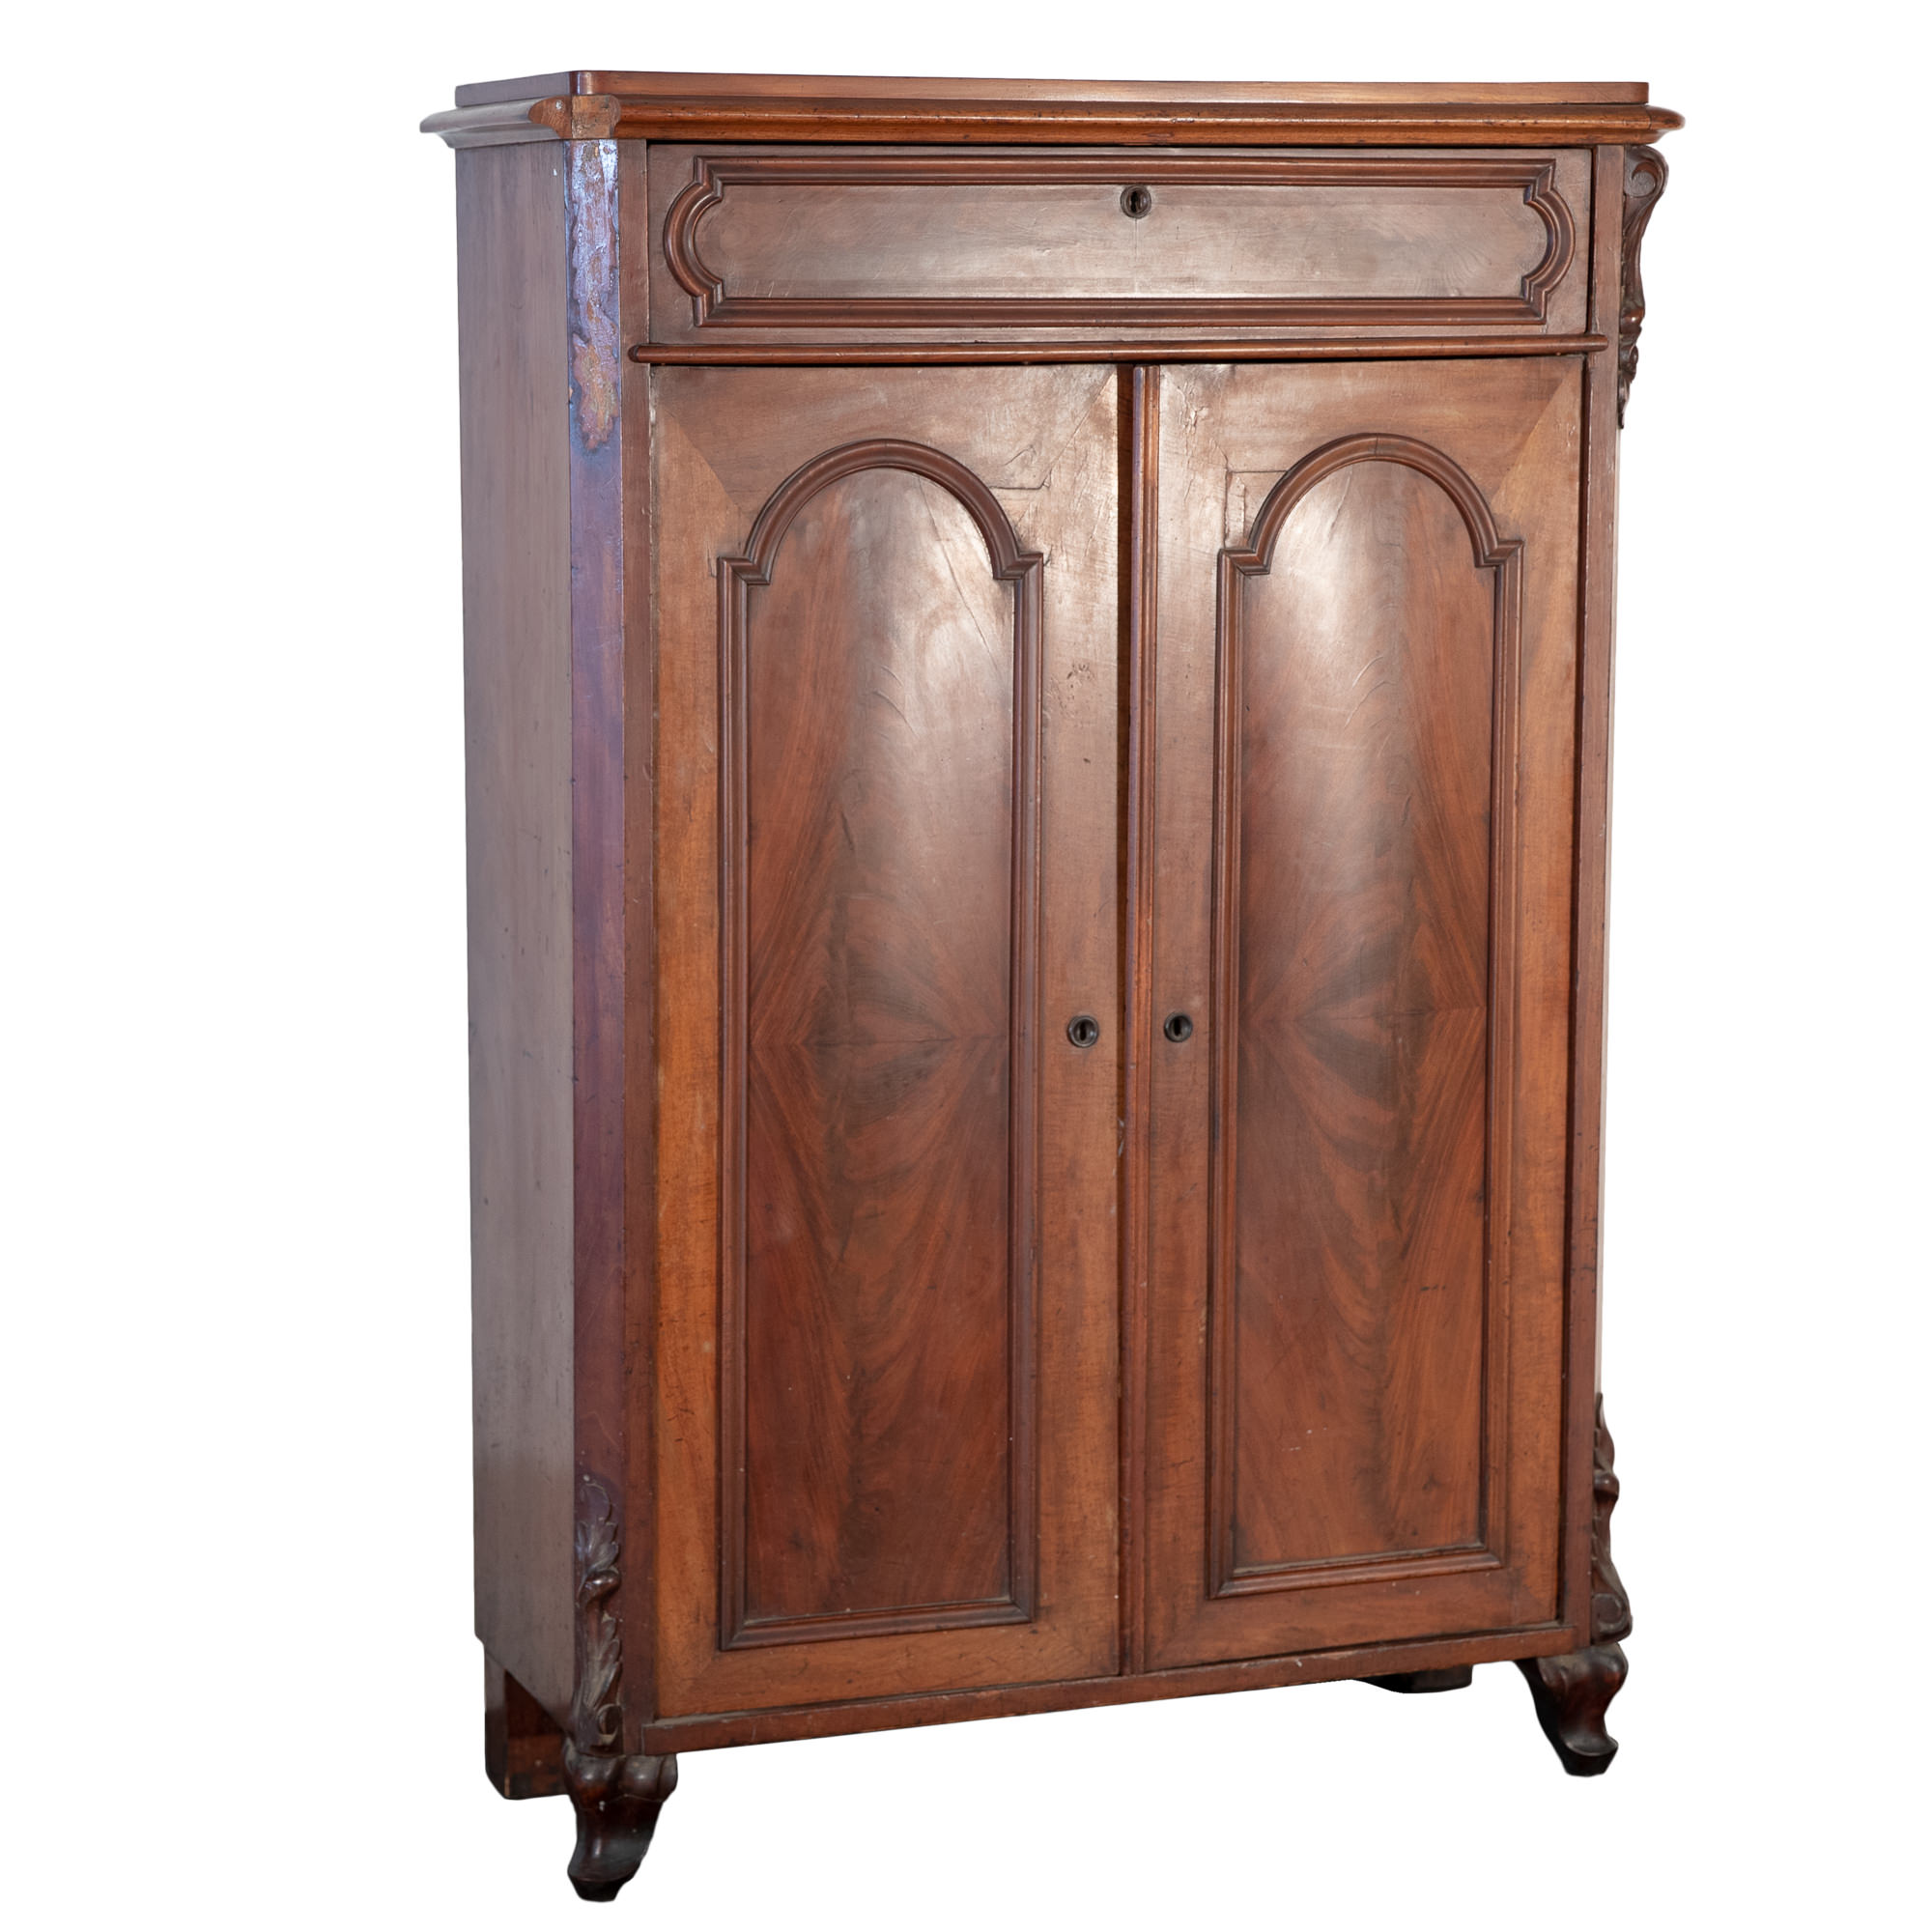 'Victorian Mahogany Cabinet with Central Drawer Late 19th Century'